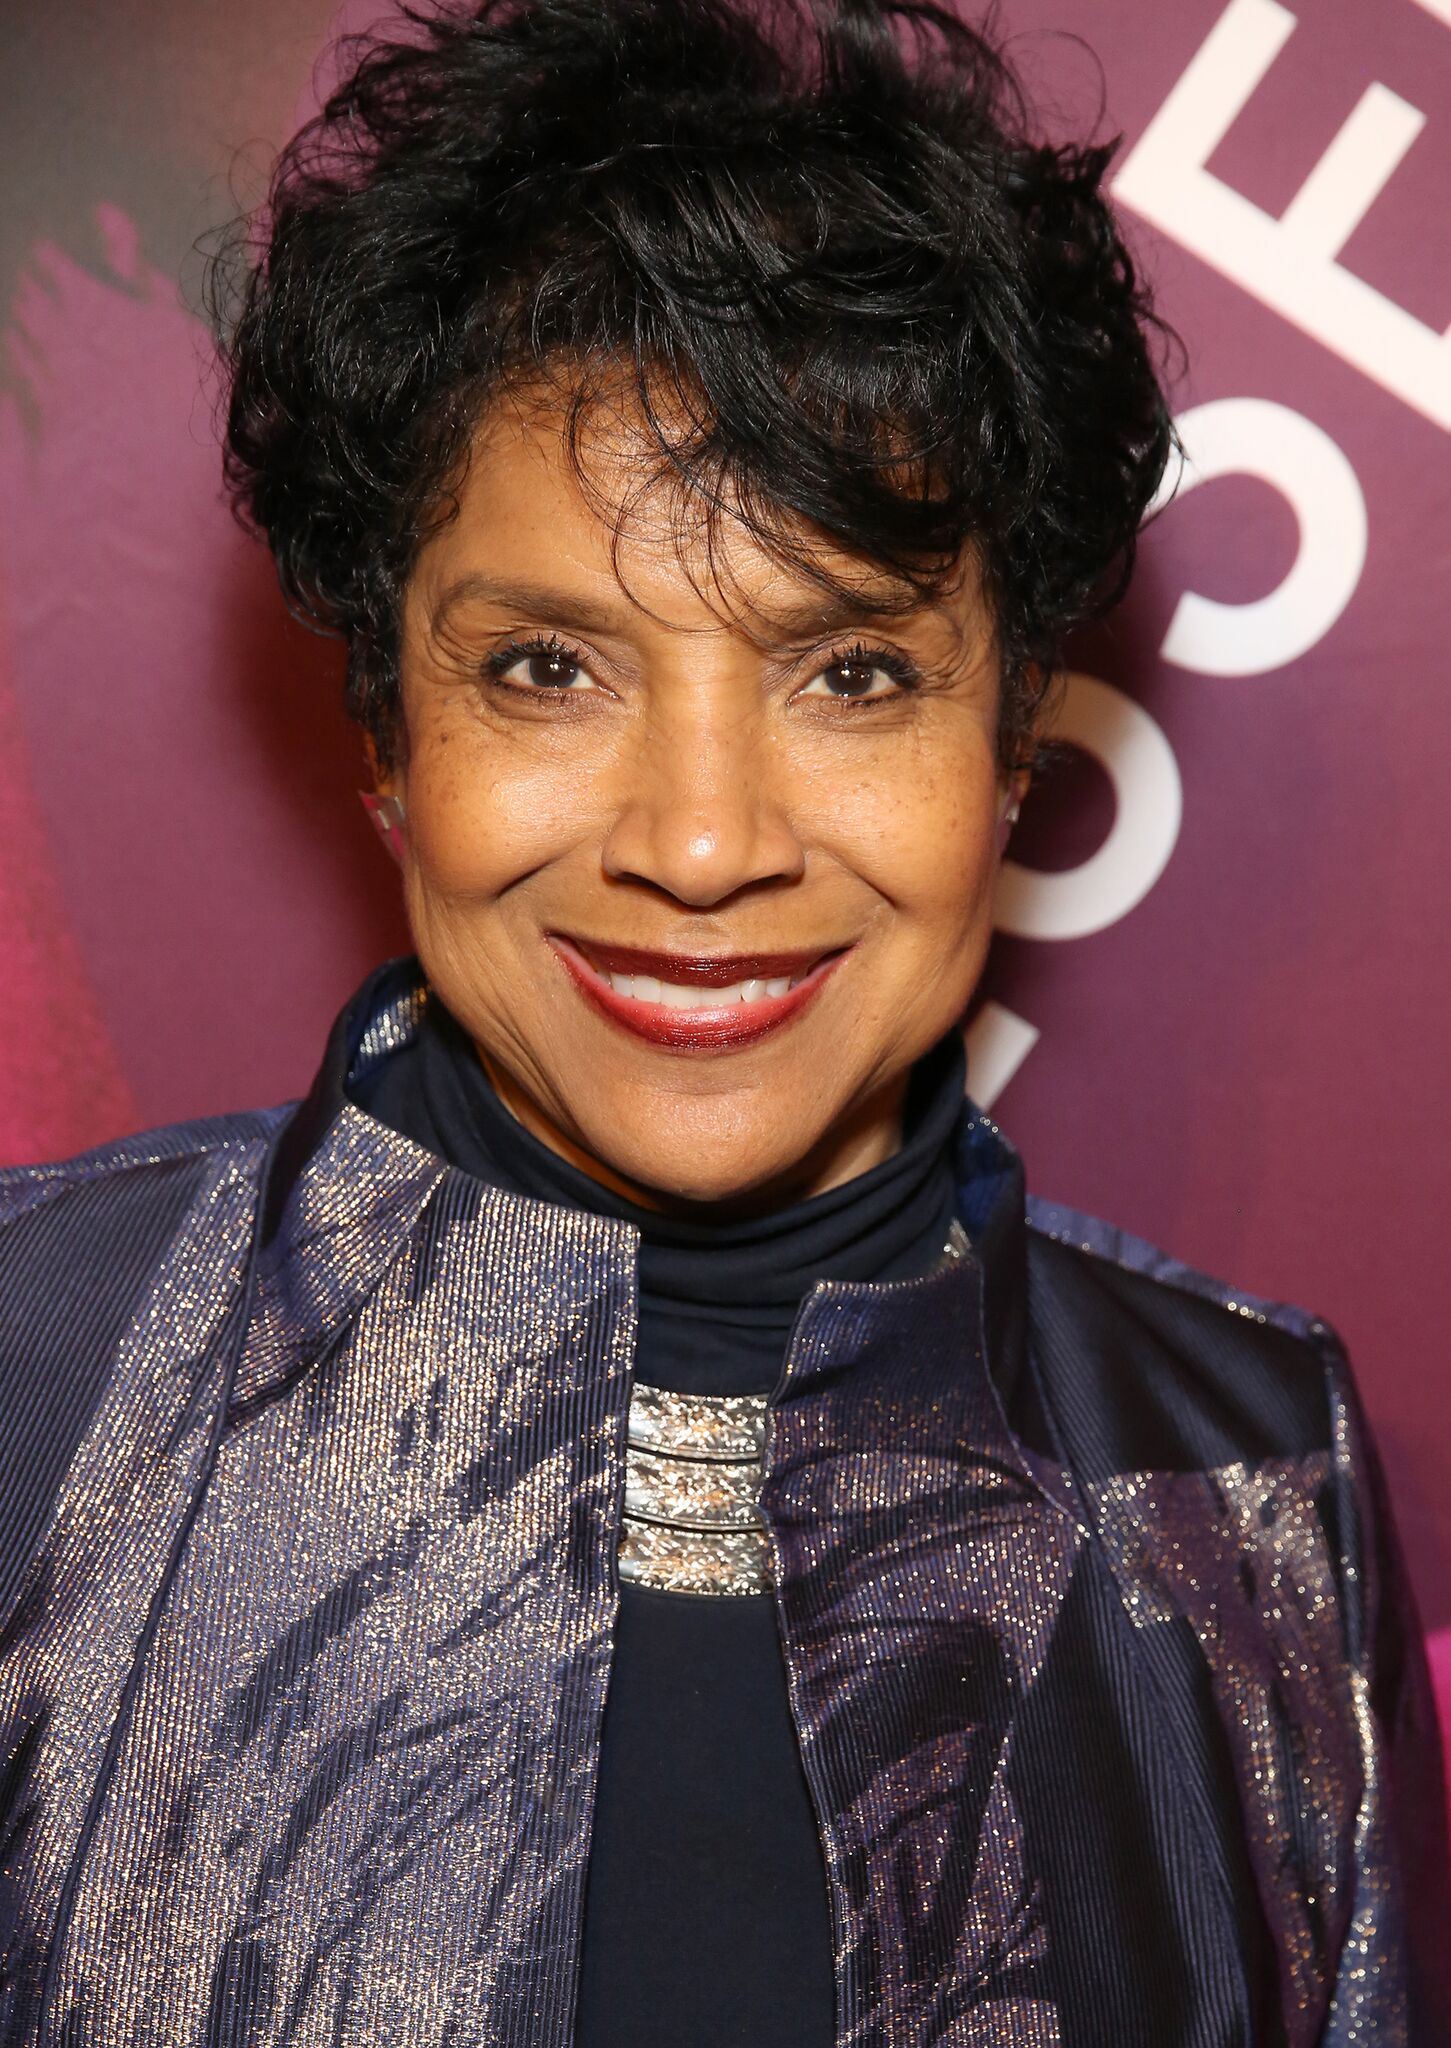  Phylicia Rashad attends the Broadway opening night performance for "Children of a Lesser God" at Studio 54 Theatre on April 11, 2018 in New York City | Photo: Getty Images